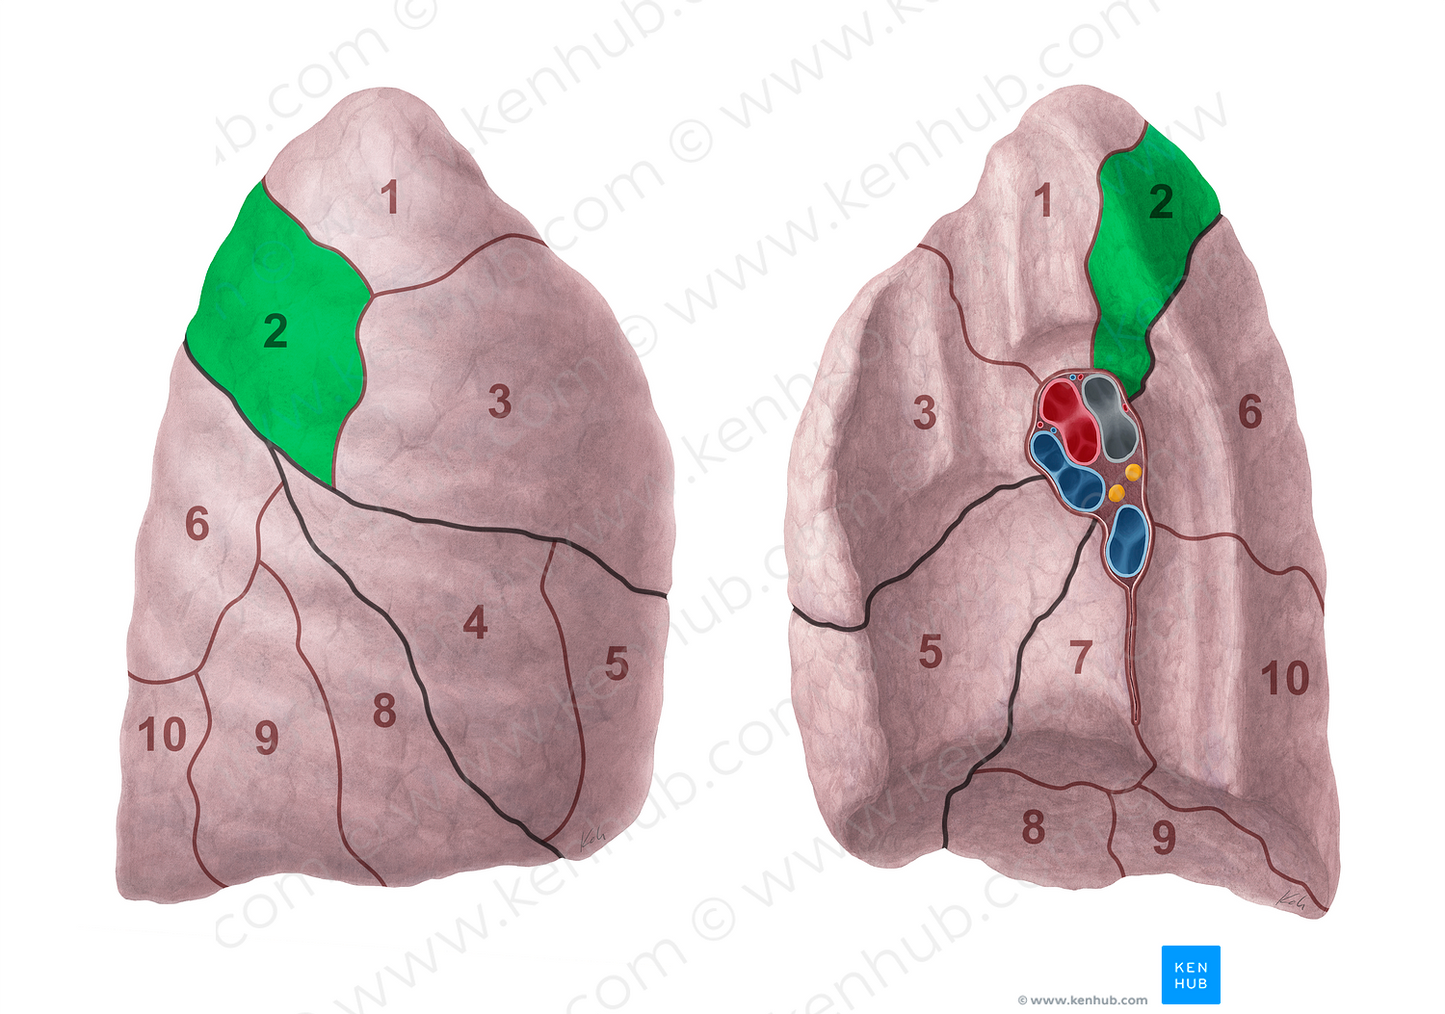 Posterior segment of right lung (#20689)